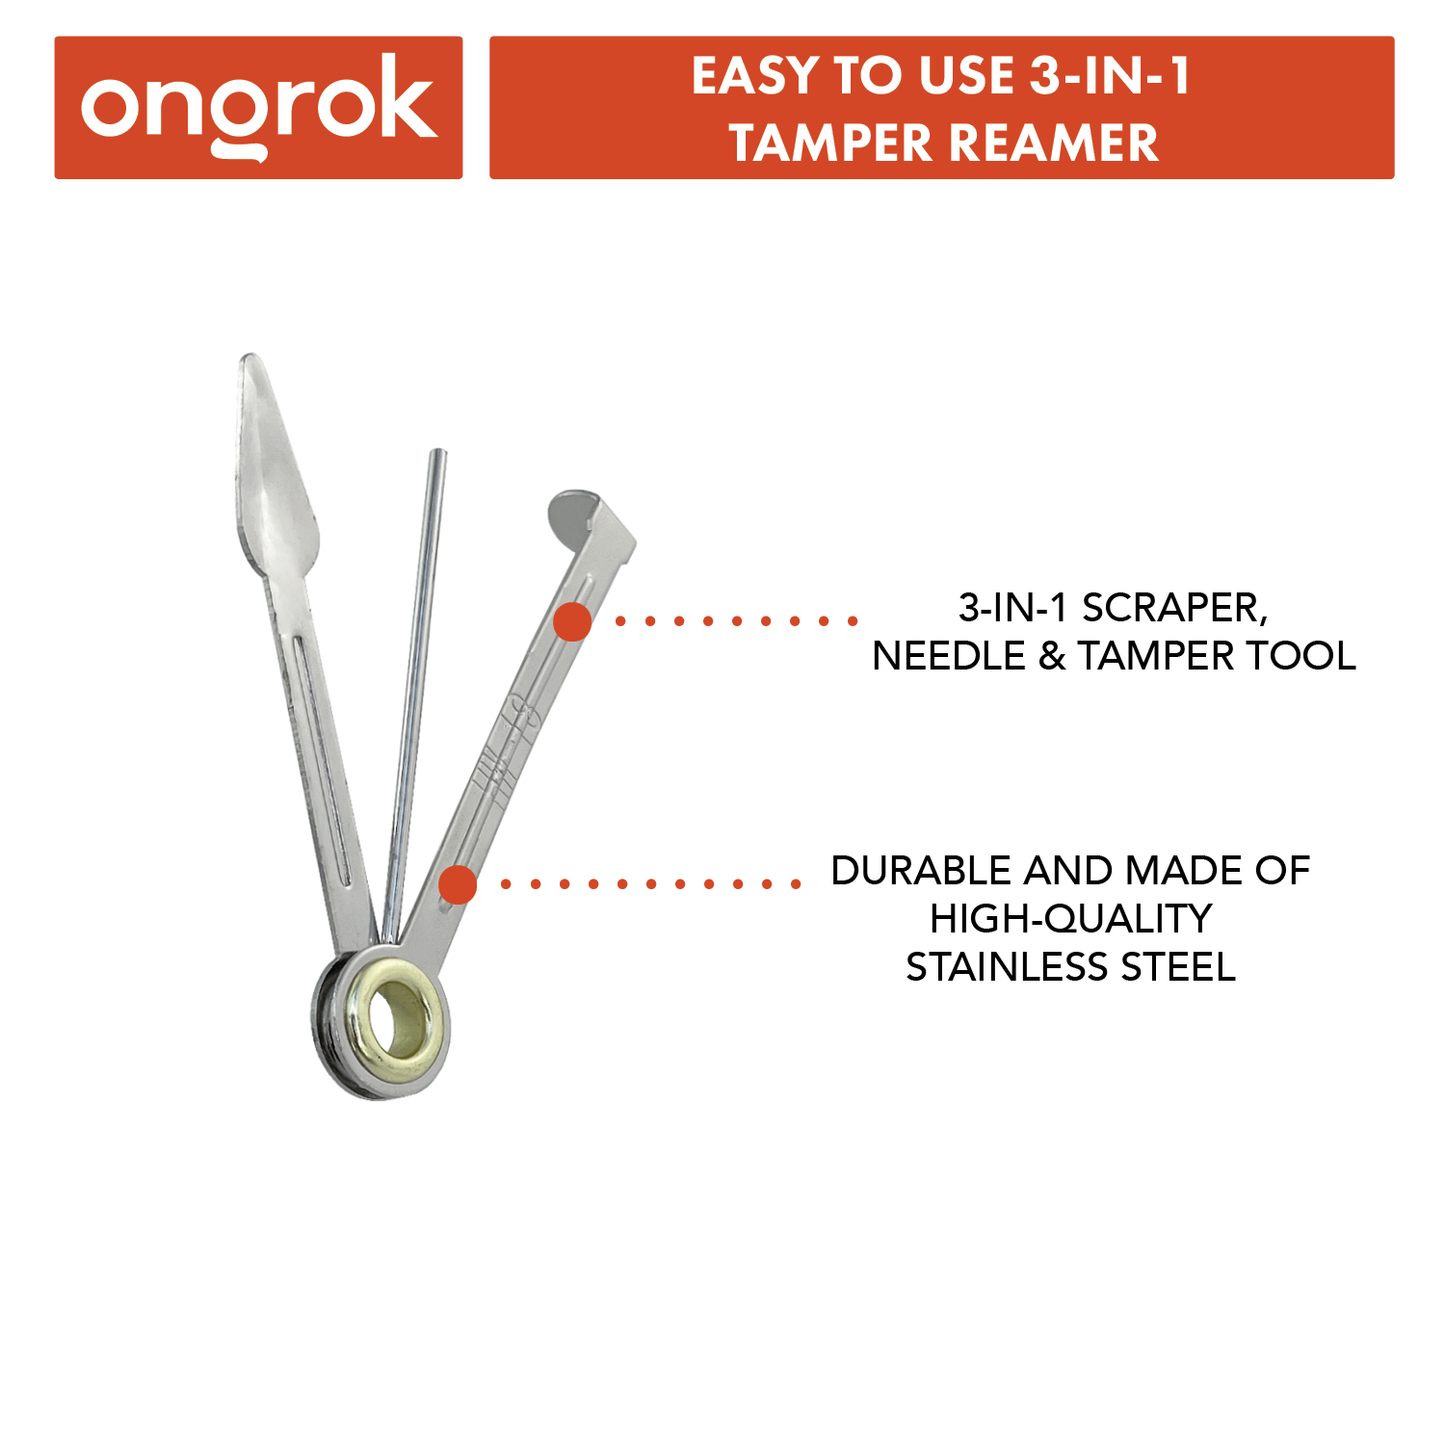 Ongrok Accessory Cleaning Kit